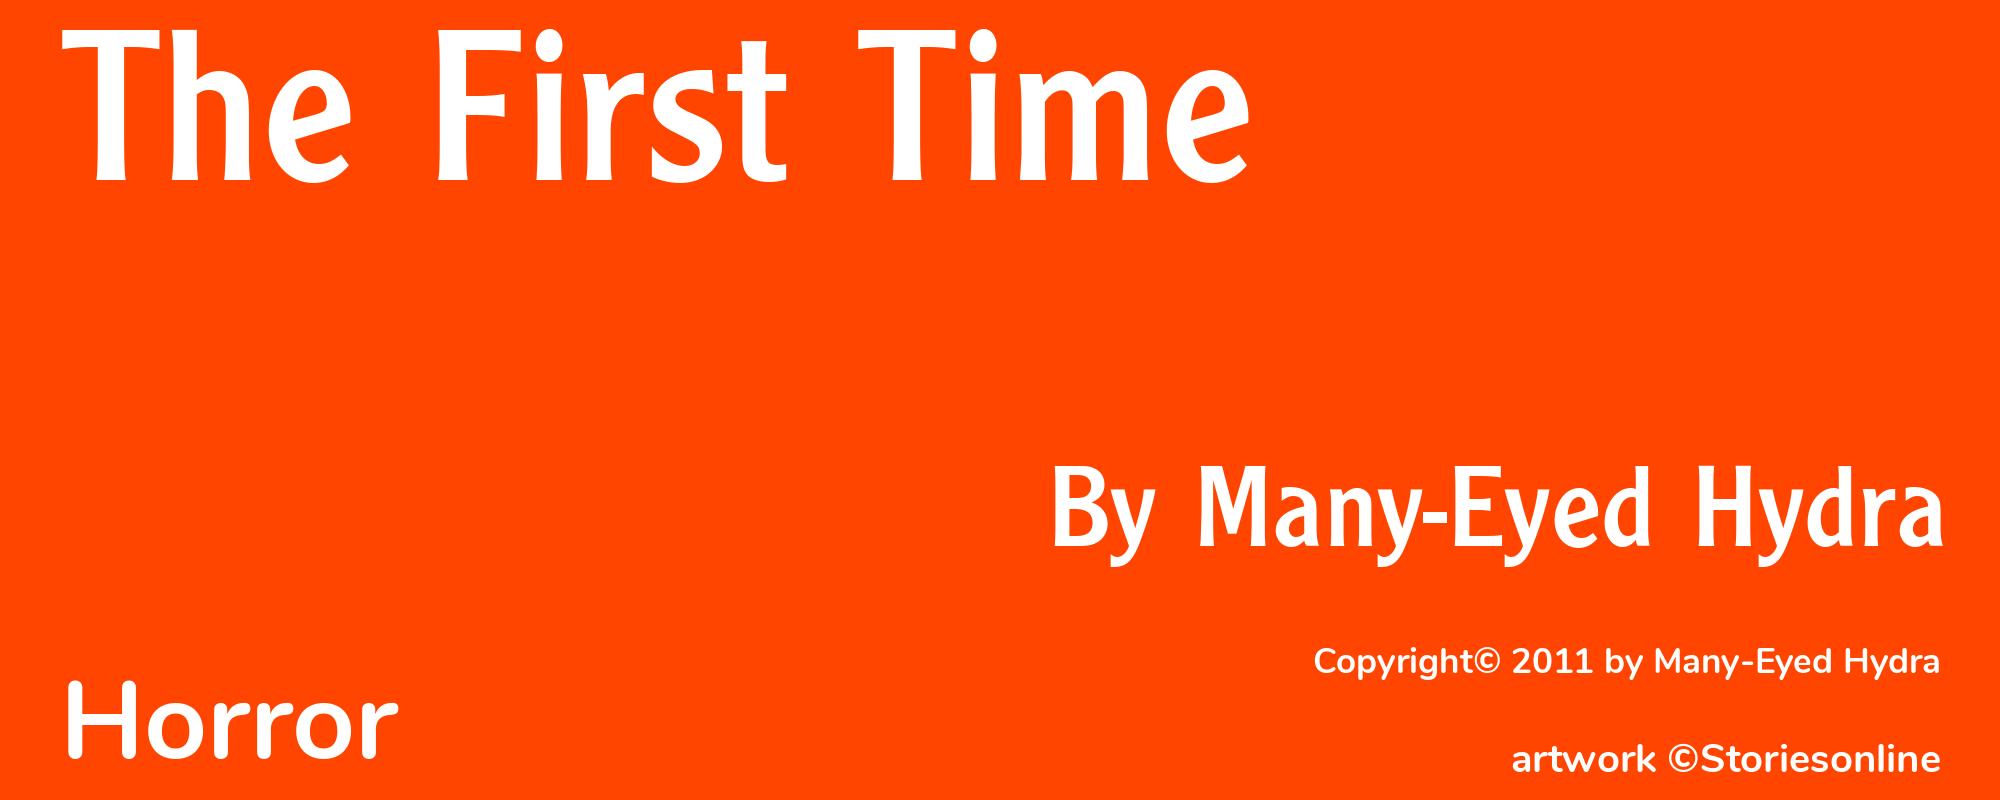 The First Time - Cover